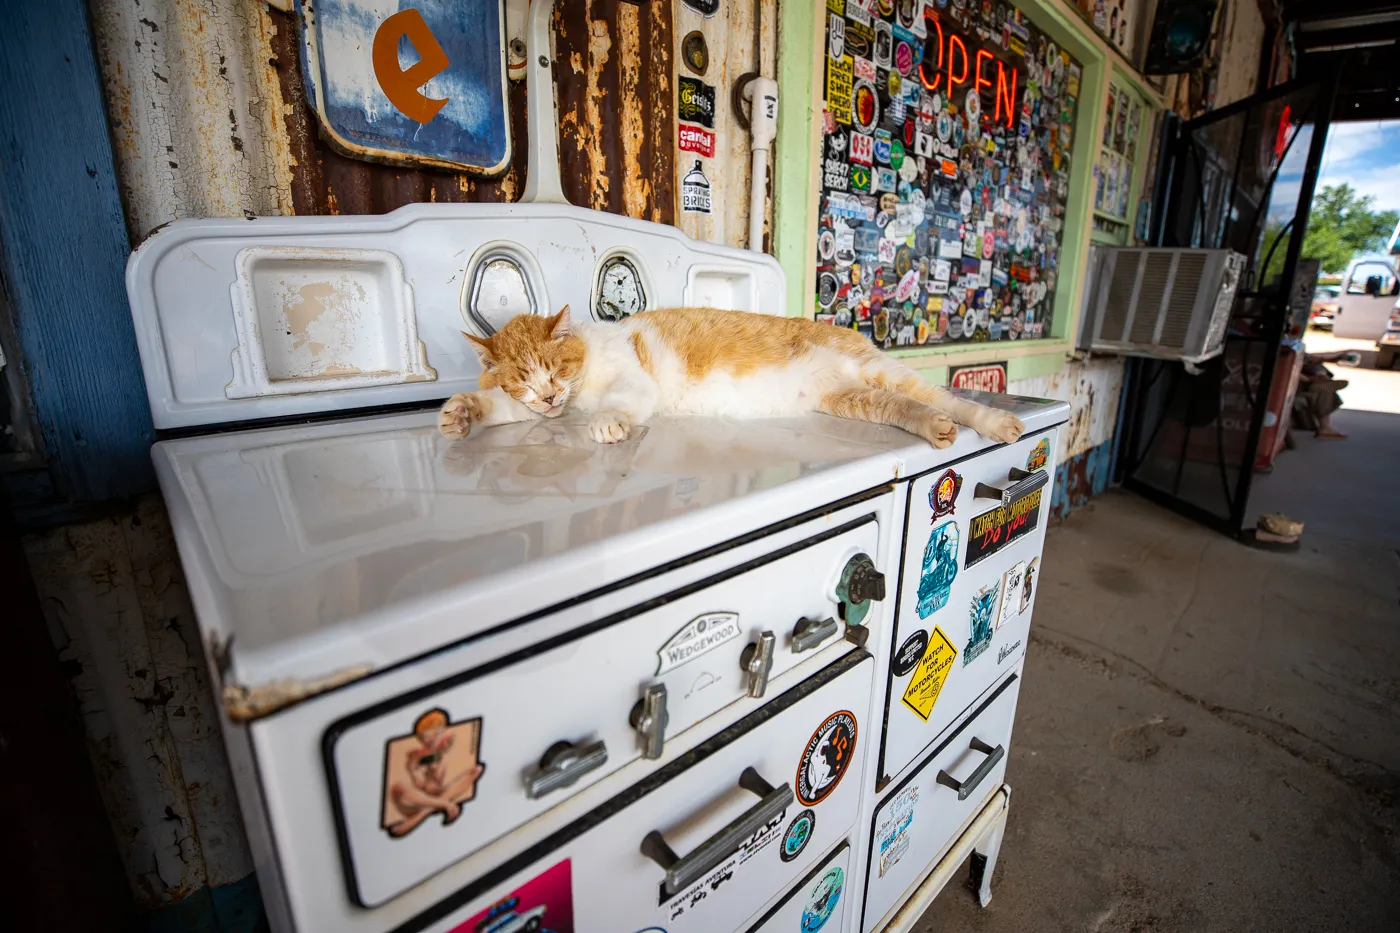 Resident cat at Hackberry General Store in Kingman, Arizona Route 66 Roadside Attraction and Souvenir Shop